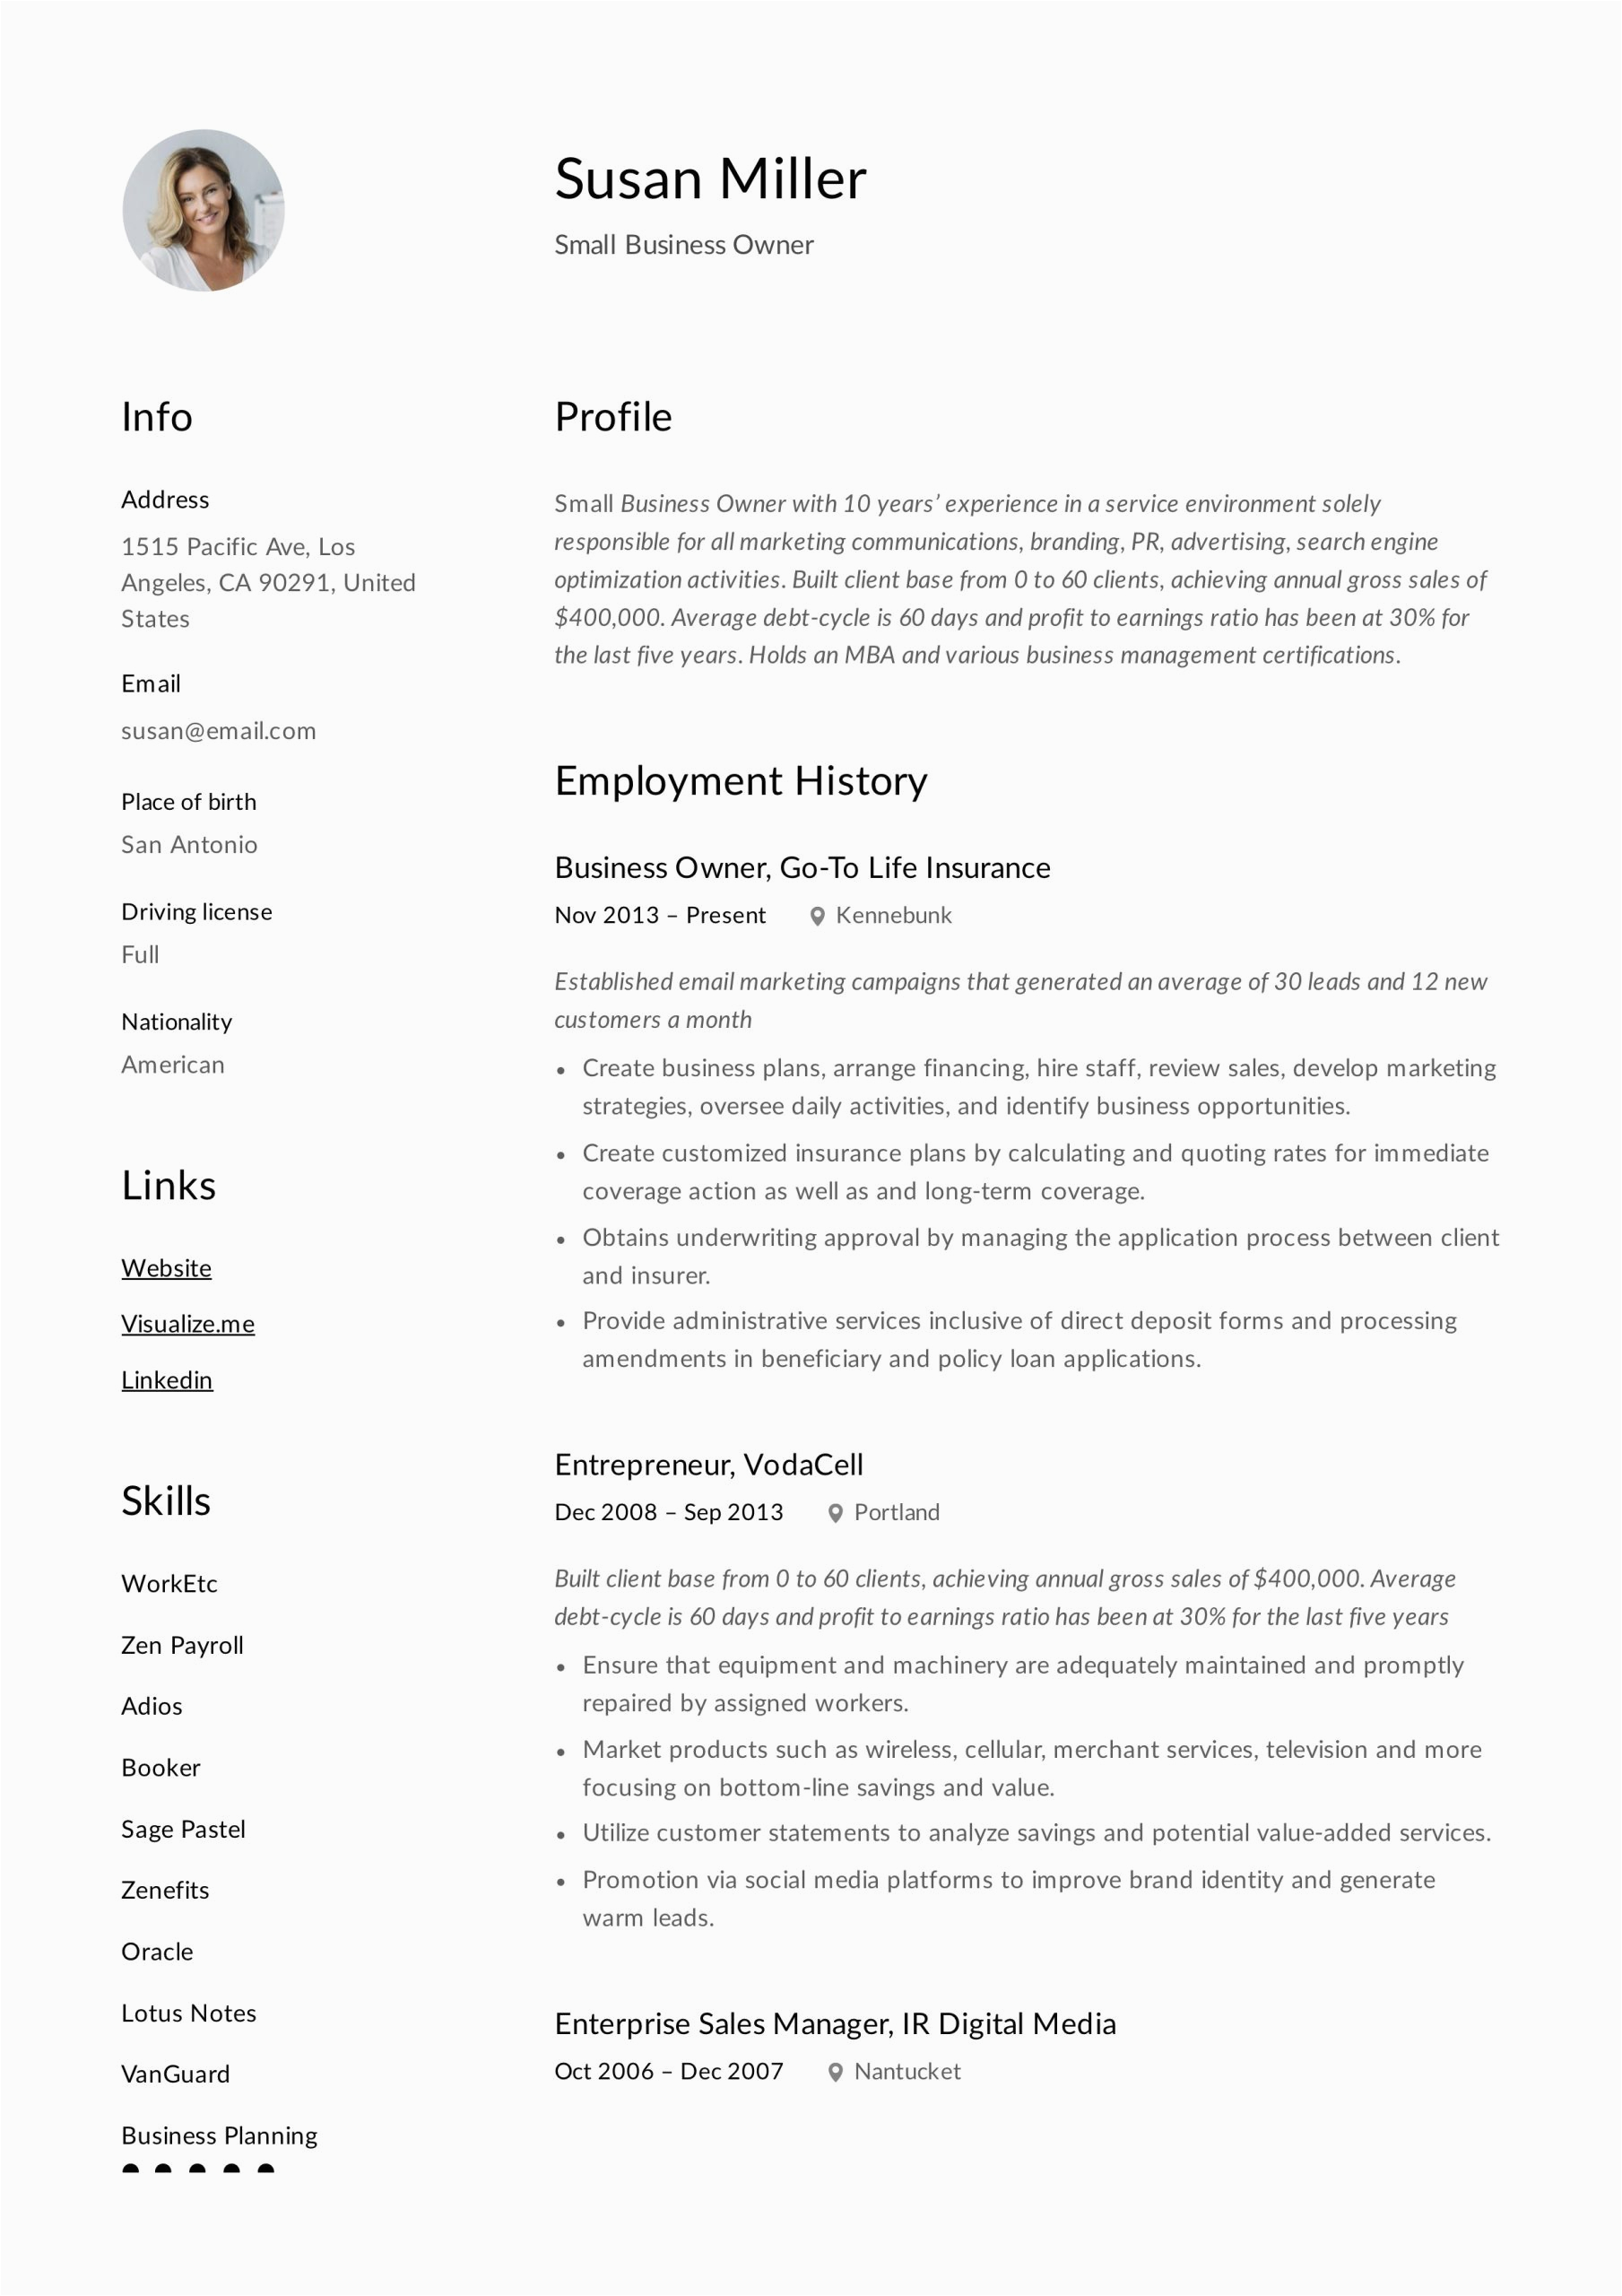 Sample Resume with Little Job Experience Sample Resume for someone with Little Work Experience Good Resume